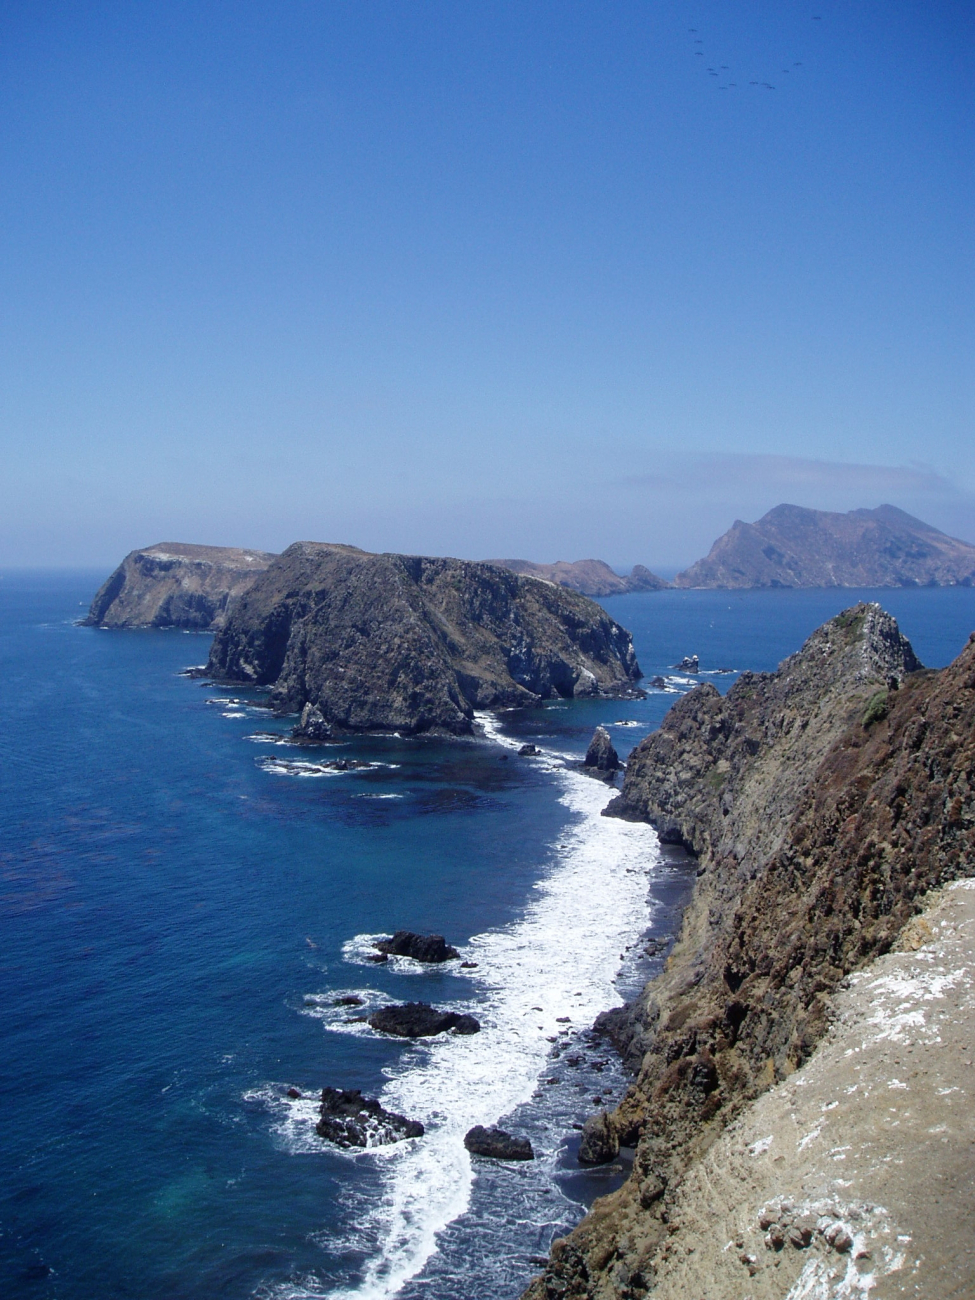 Looking west from East Anacapa Island along the sheer cliffs of the south sideof the island